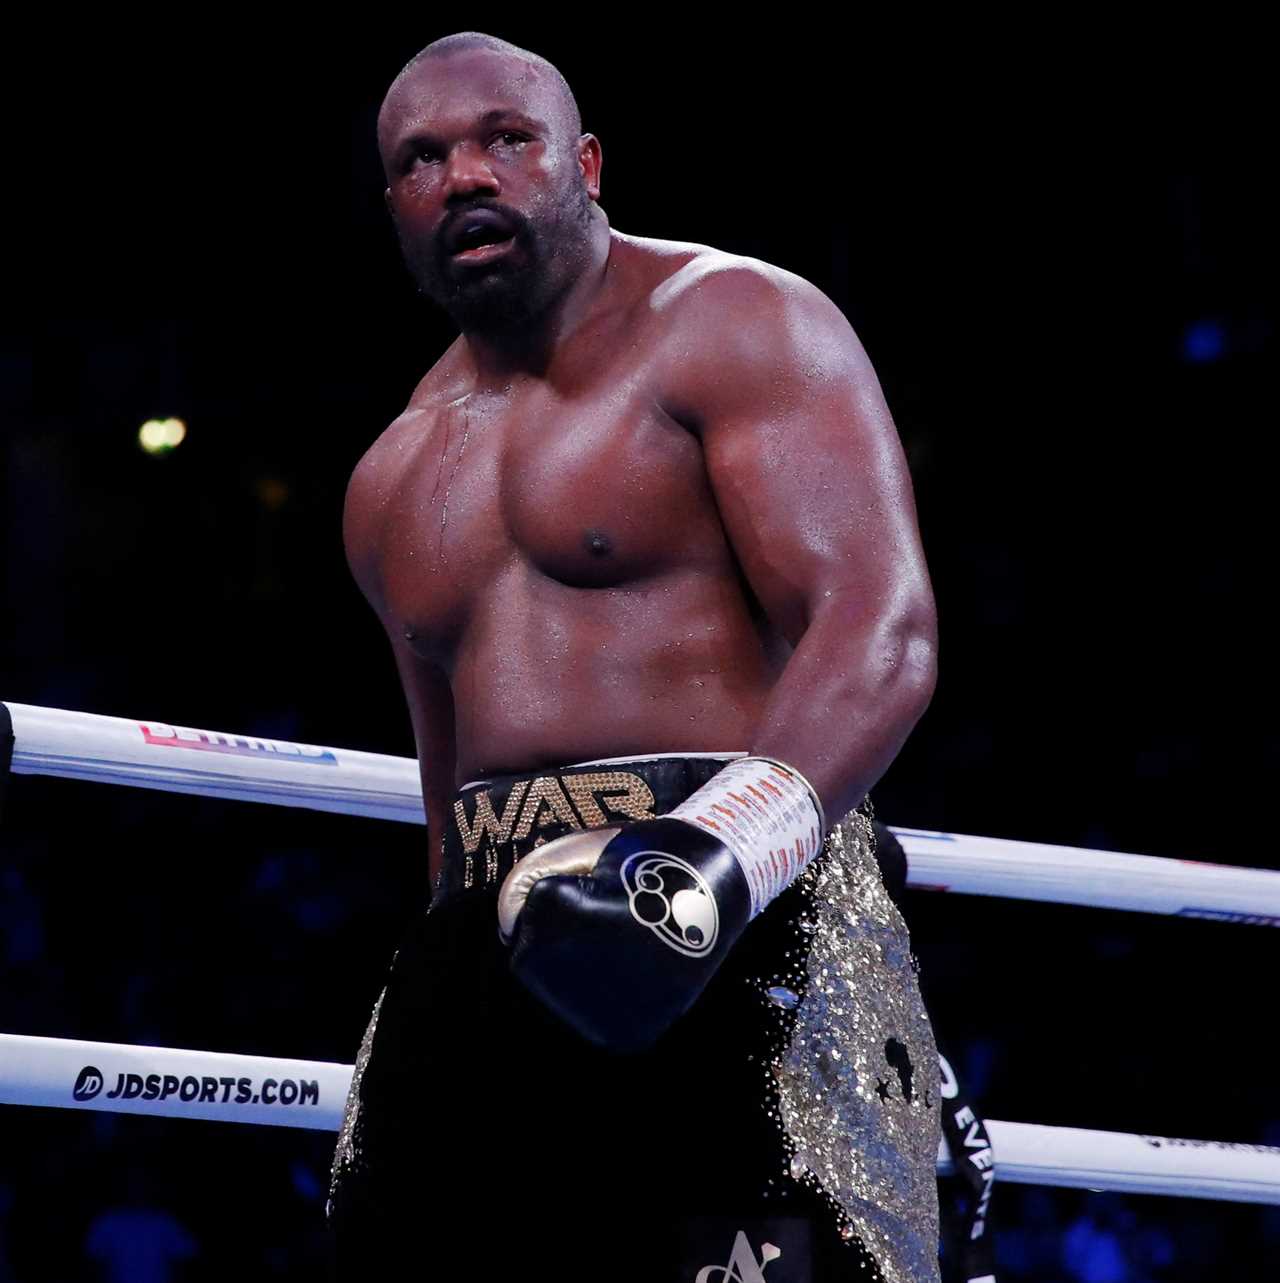 Derek Chisora asks Tyson Fury about his 'hunger', and predicts that Dillian Whyte will cause shock in the world title fight